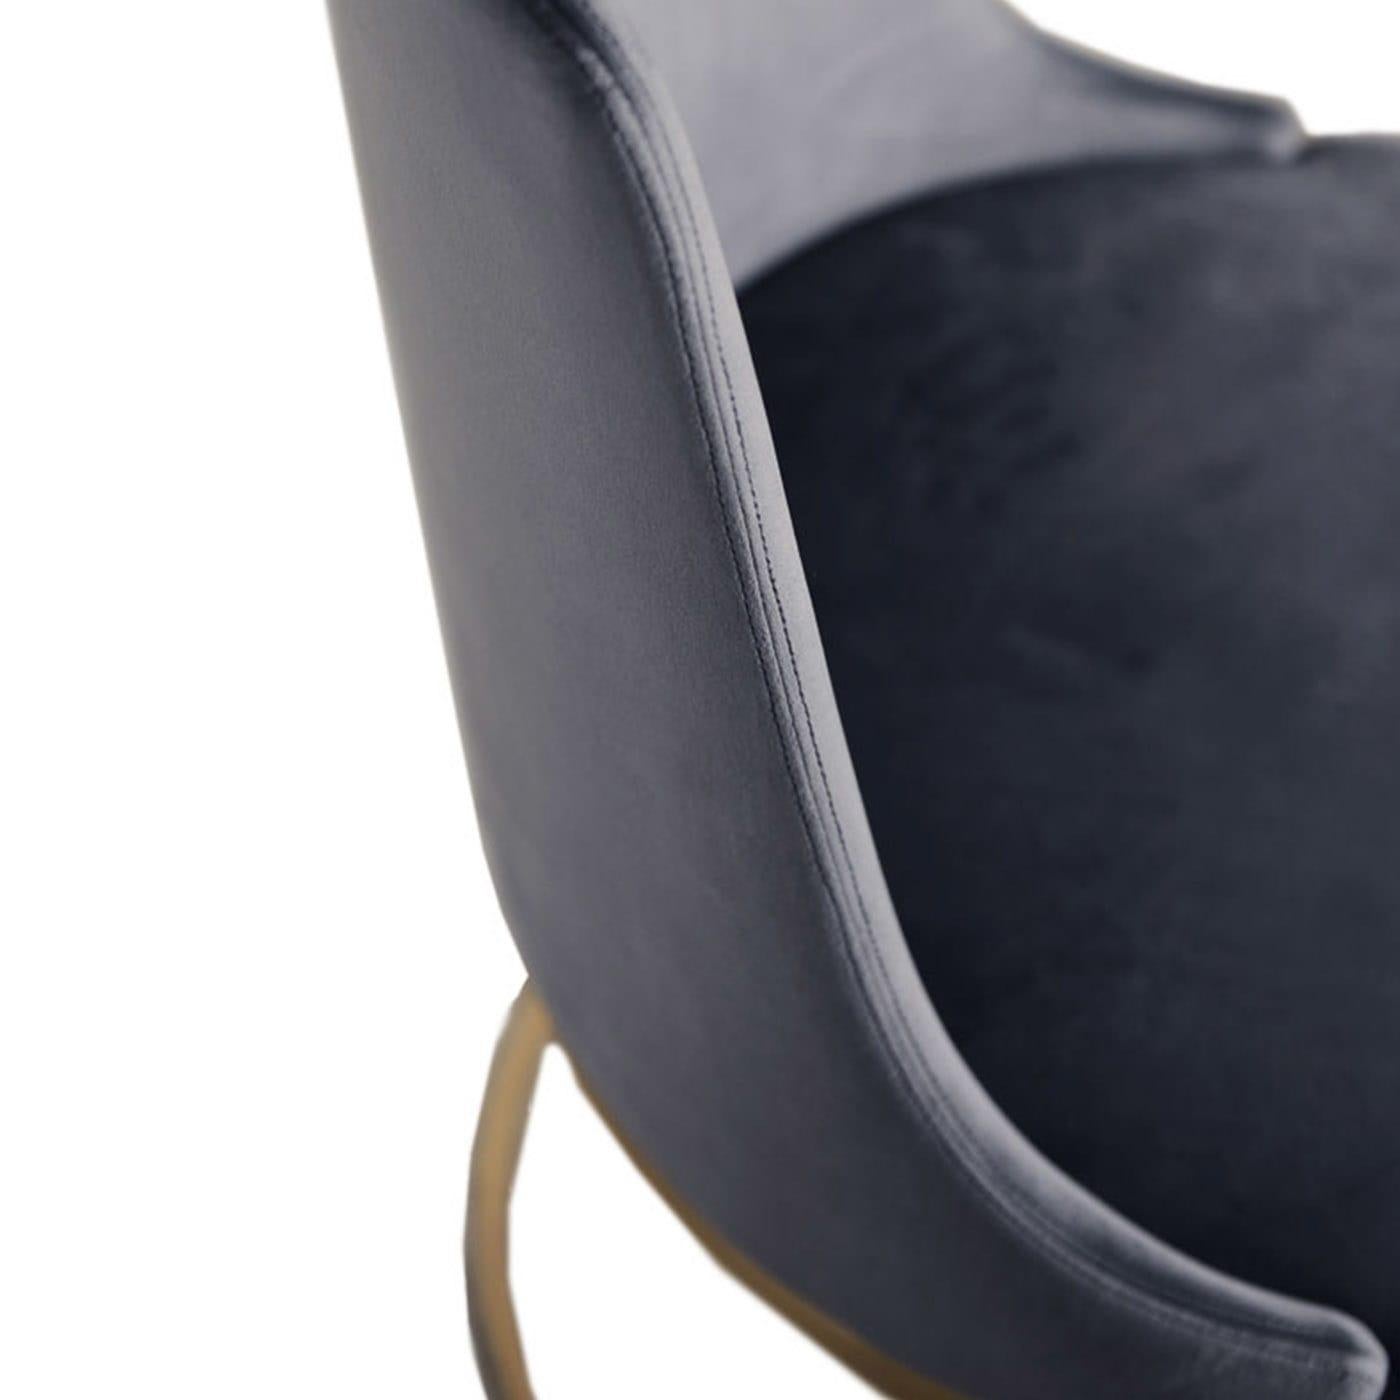 This elegant chair is characterized by padded seat and back, enriched by Econabuk Pepe Chiaro upholstery. The Brass metal base completes the carefully curated design.